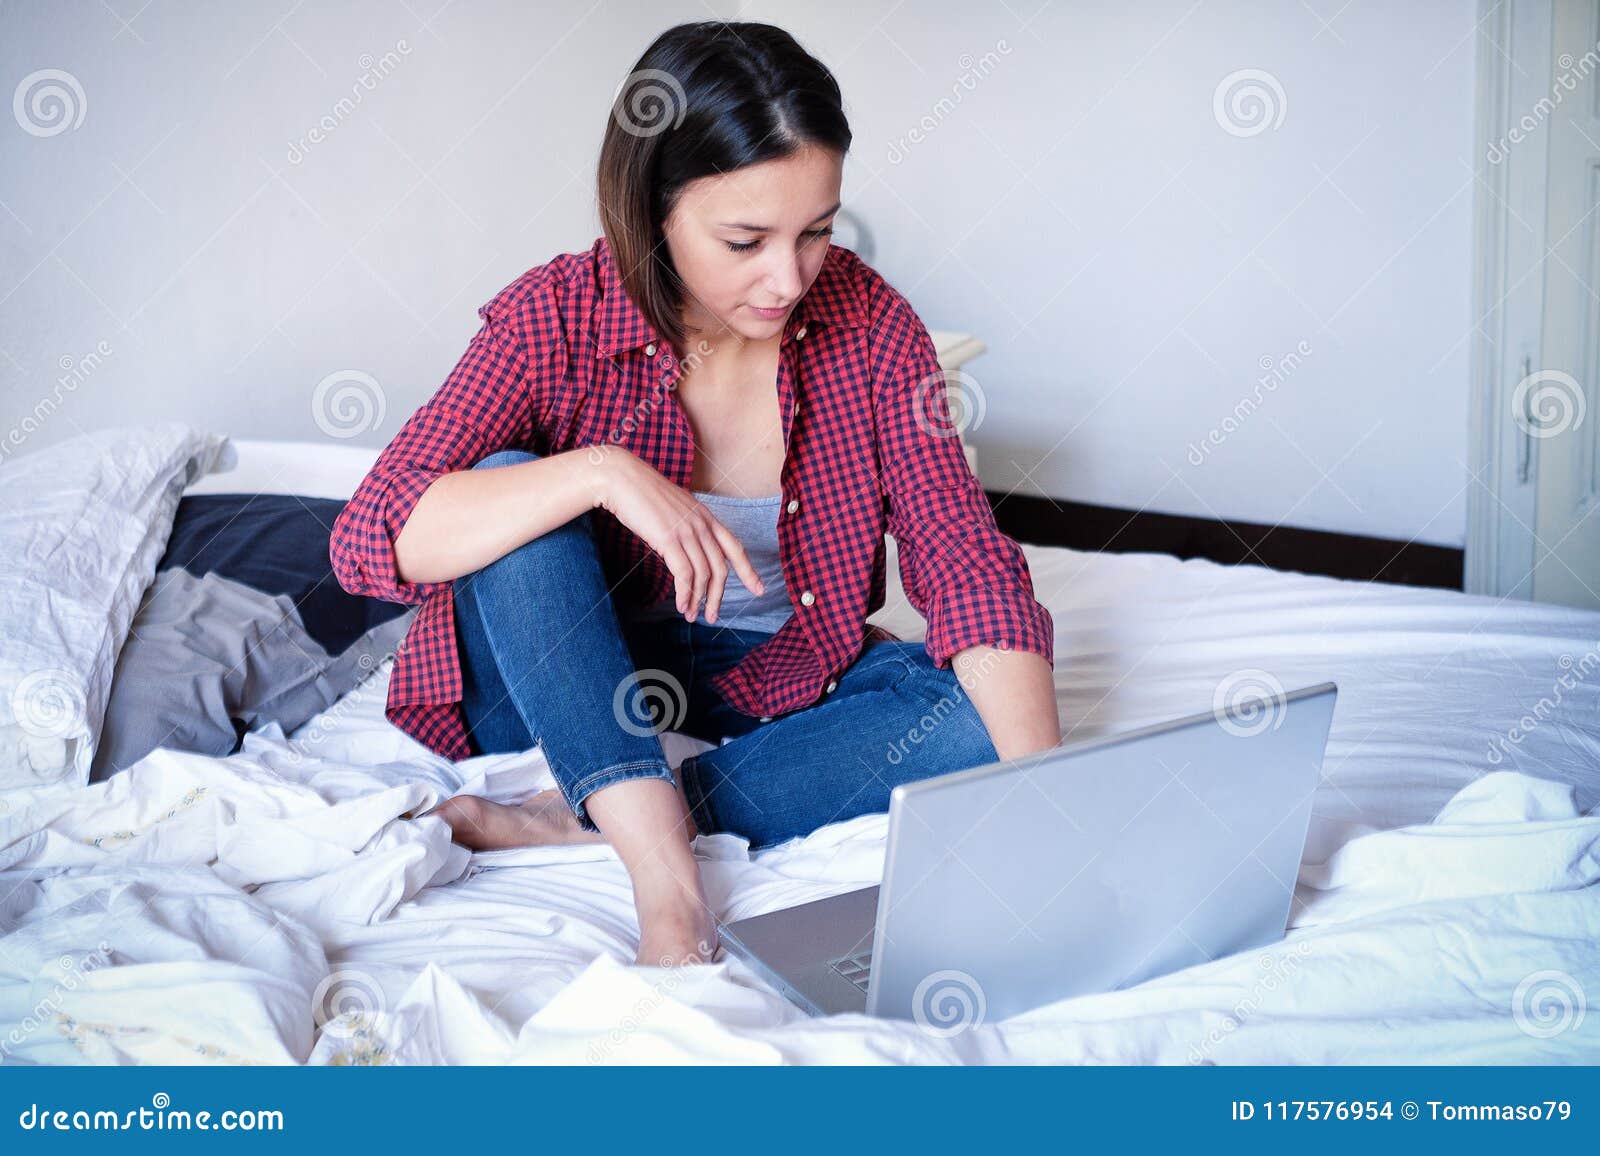 Bad Wep Porn Videos Download - Young Girl Using Computer and Surfing the Web Sitting on the Bed Stock  Photo - Image of education, bedroom: 117576954